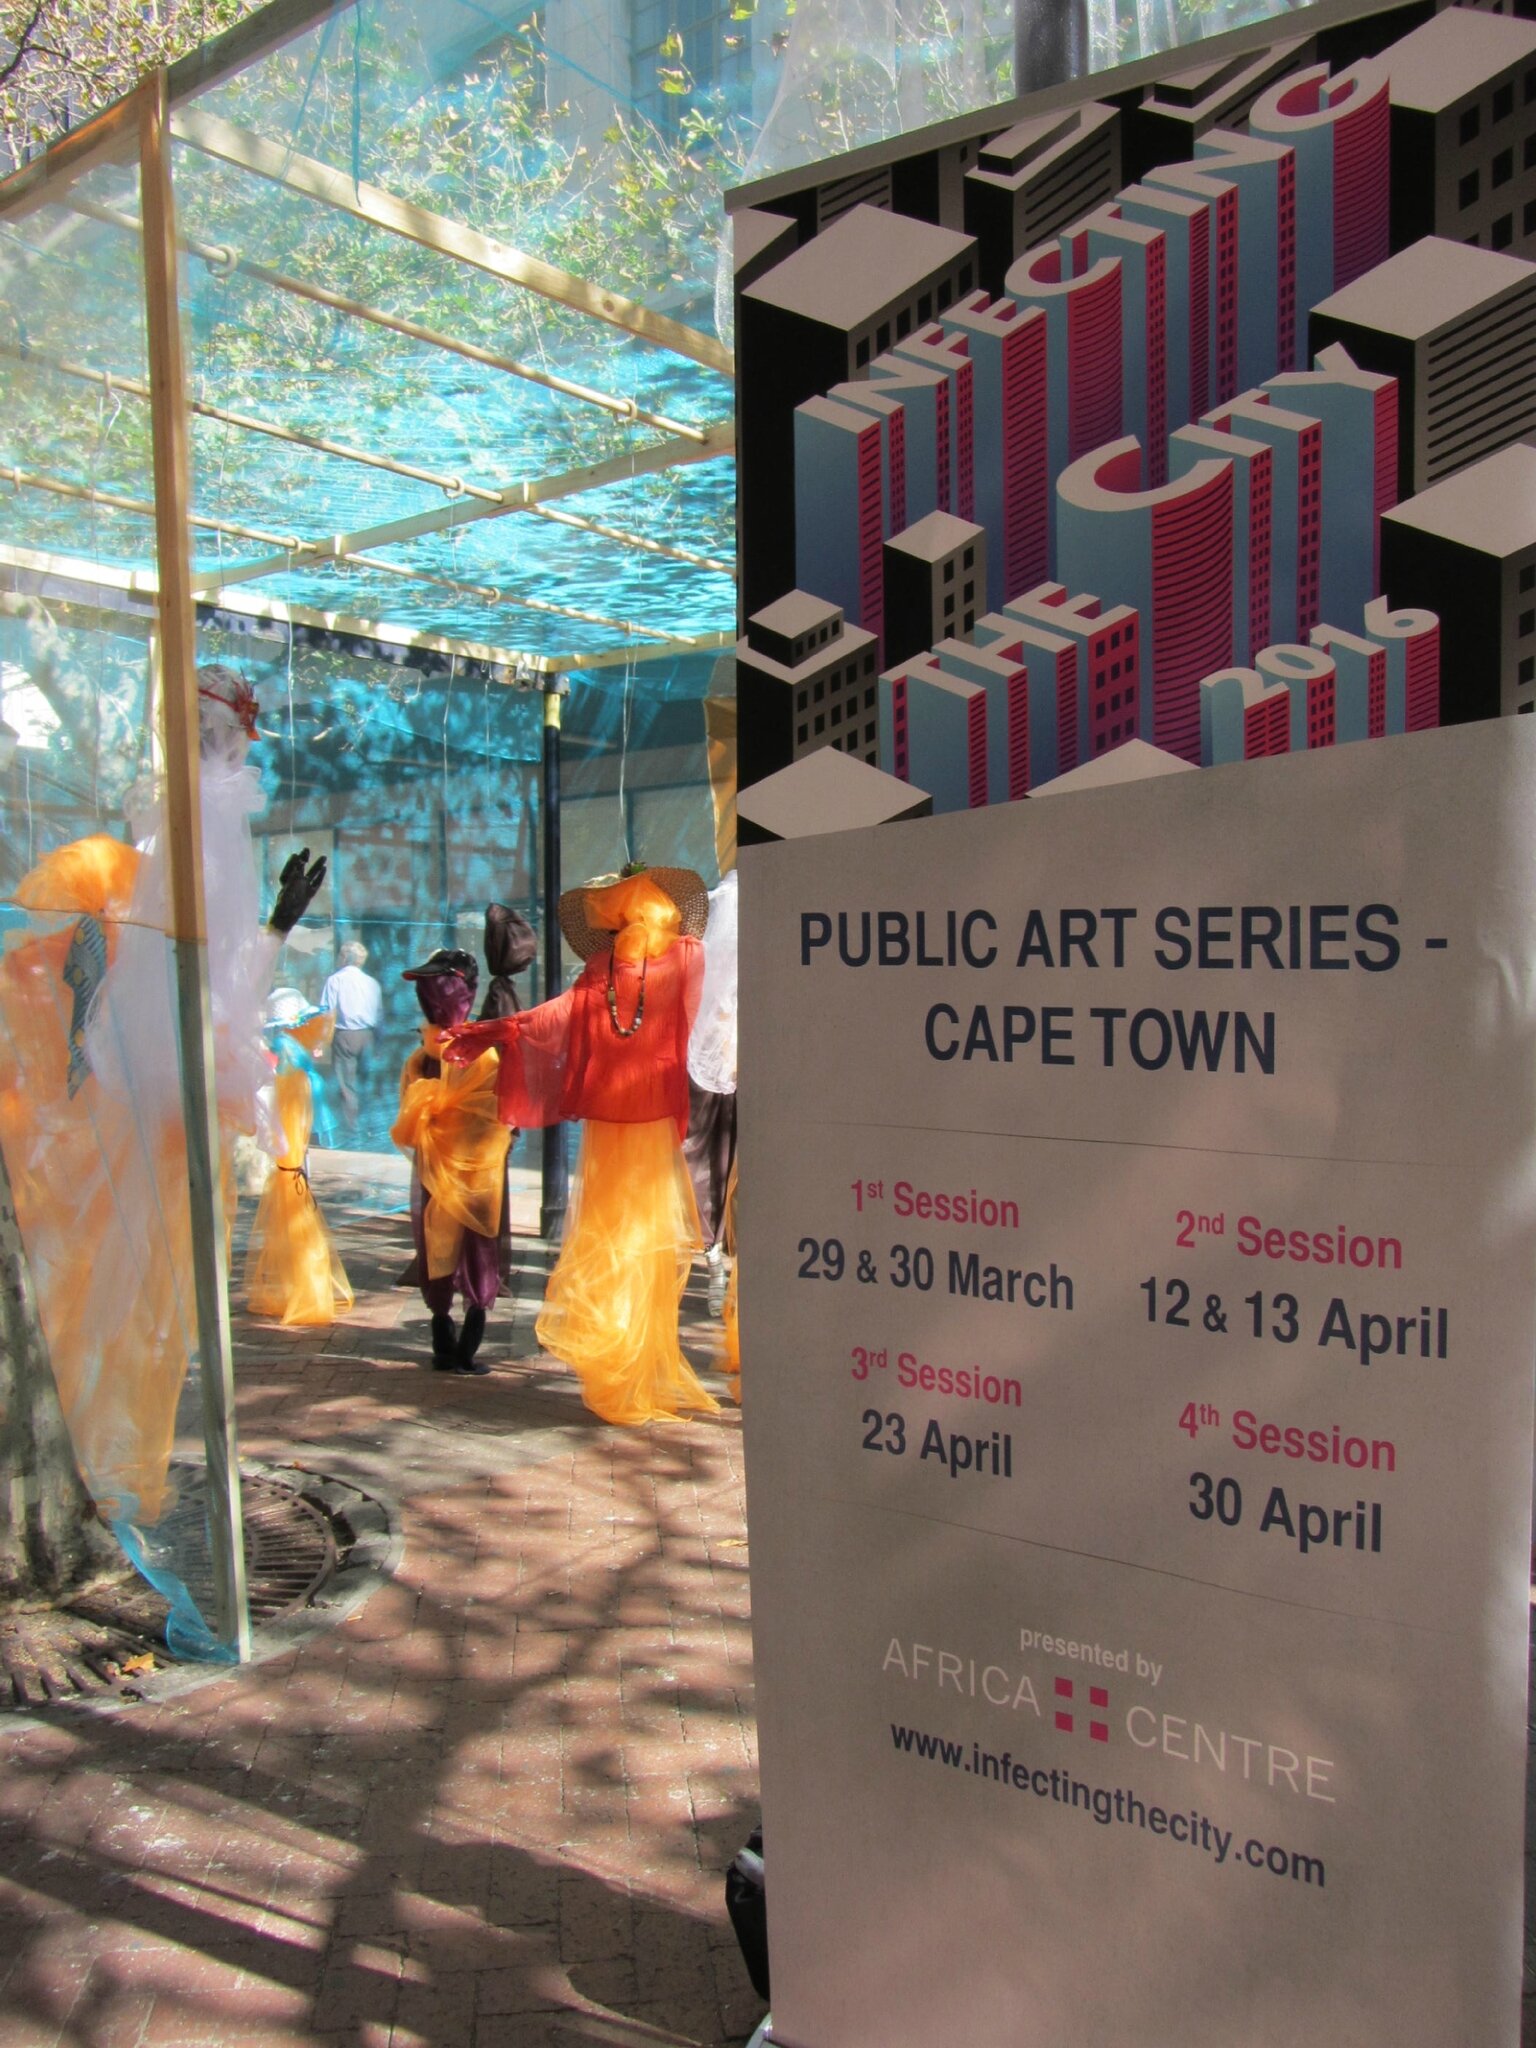 Cape-Town ITC Infecting the City 2016. Installation and Perfomance